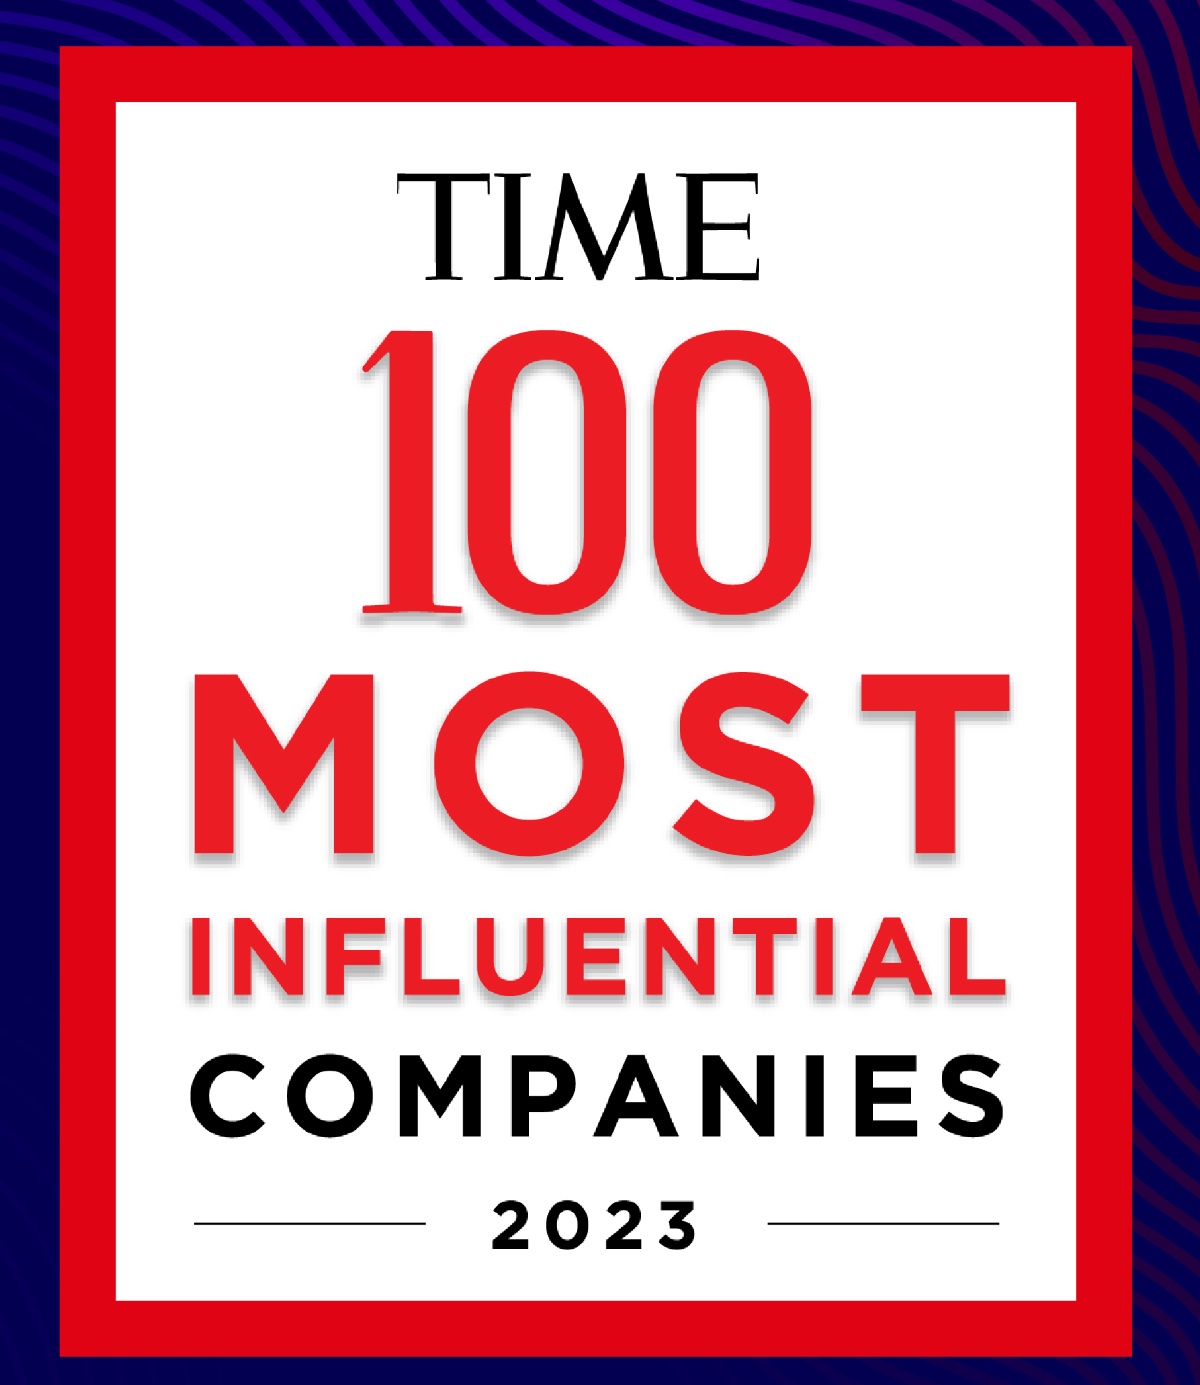 Apple among the TIME100 Most Influential Companies 2023 list